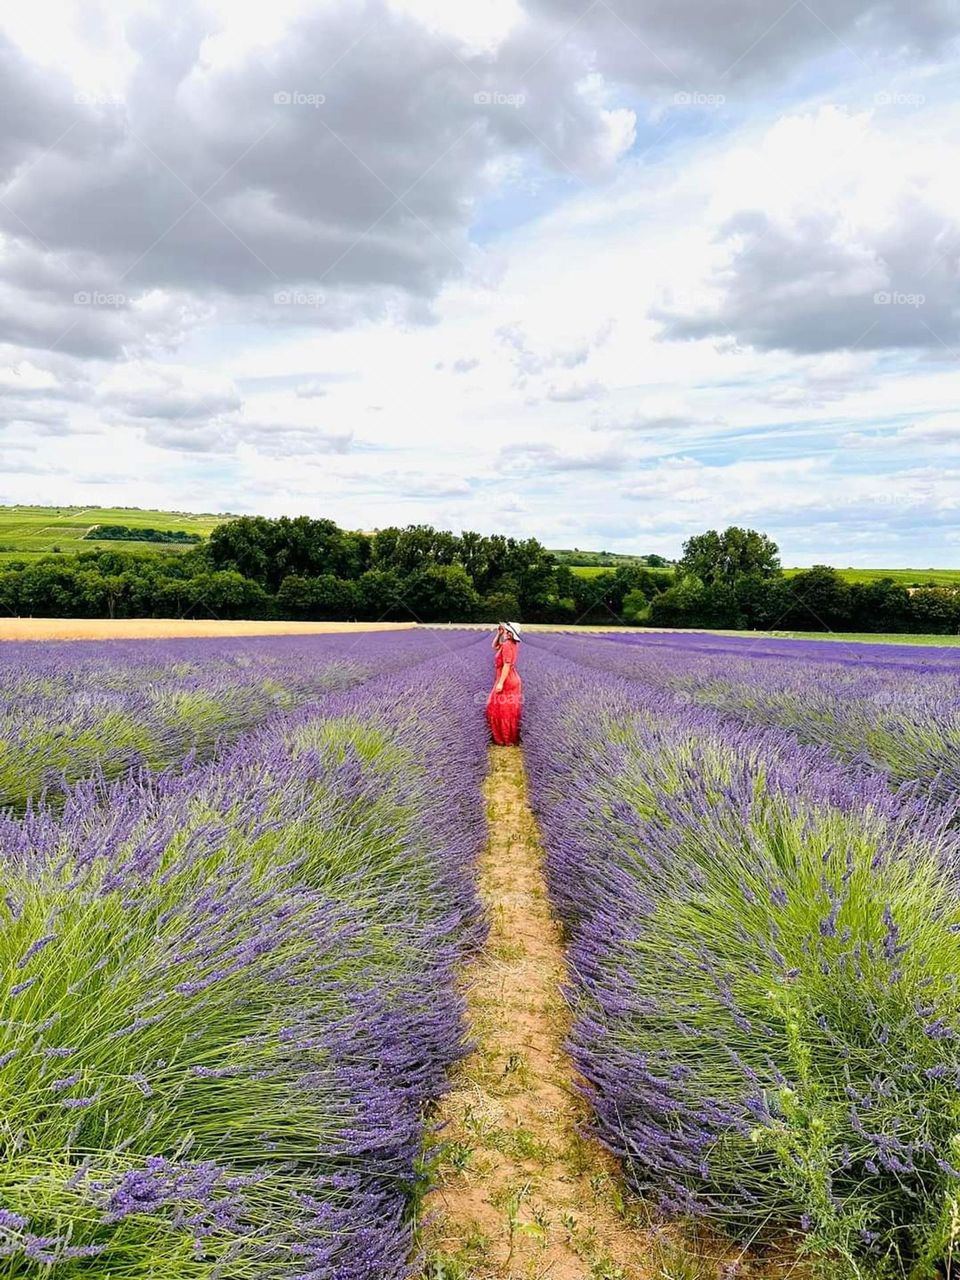 Lady in Red and Lavender